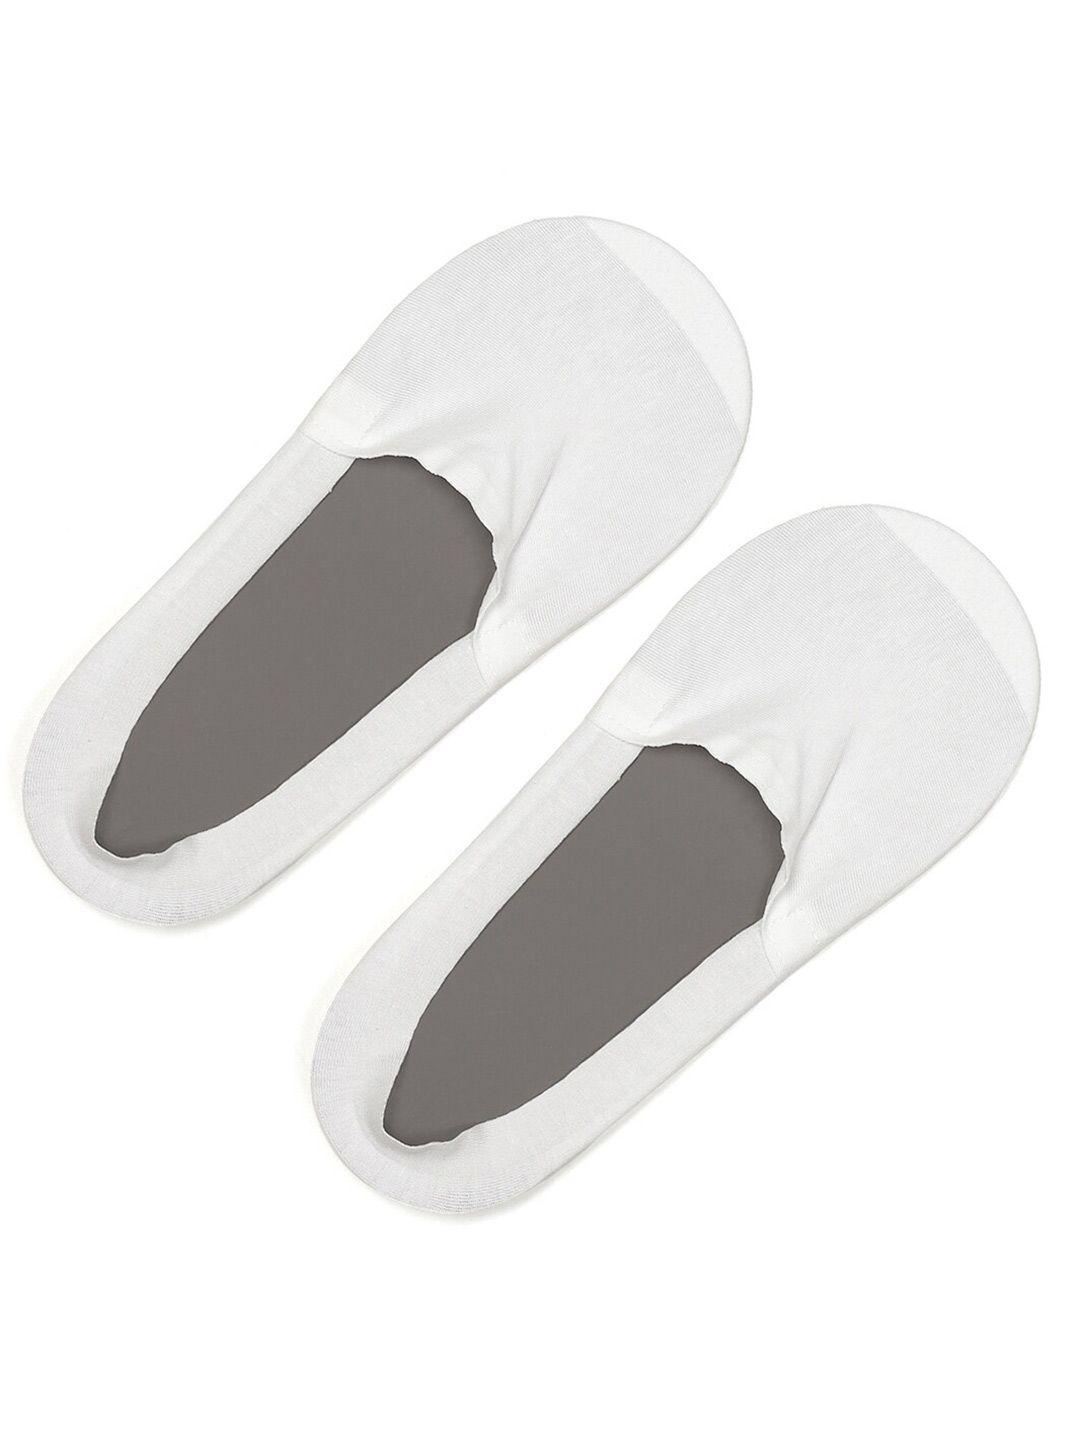 toffcraft-men-white-solid-shoe-liners